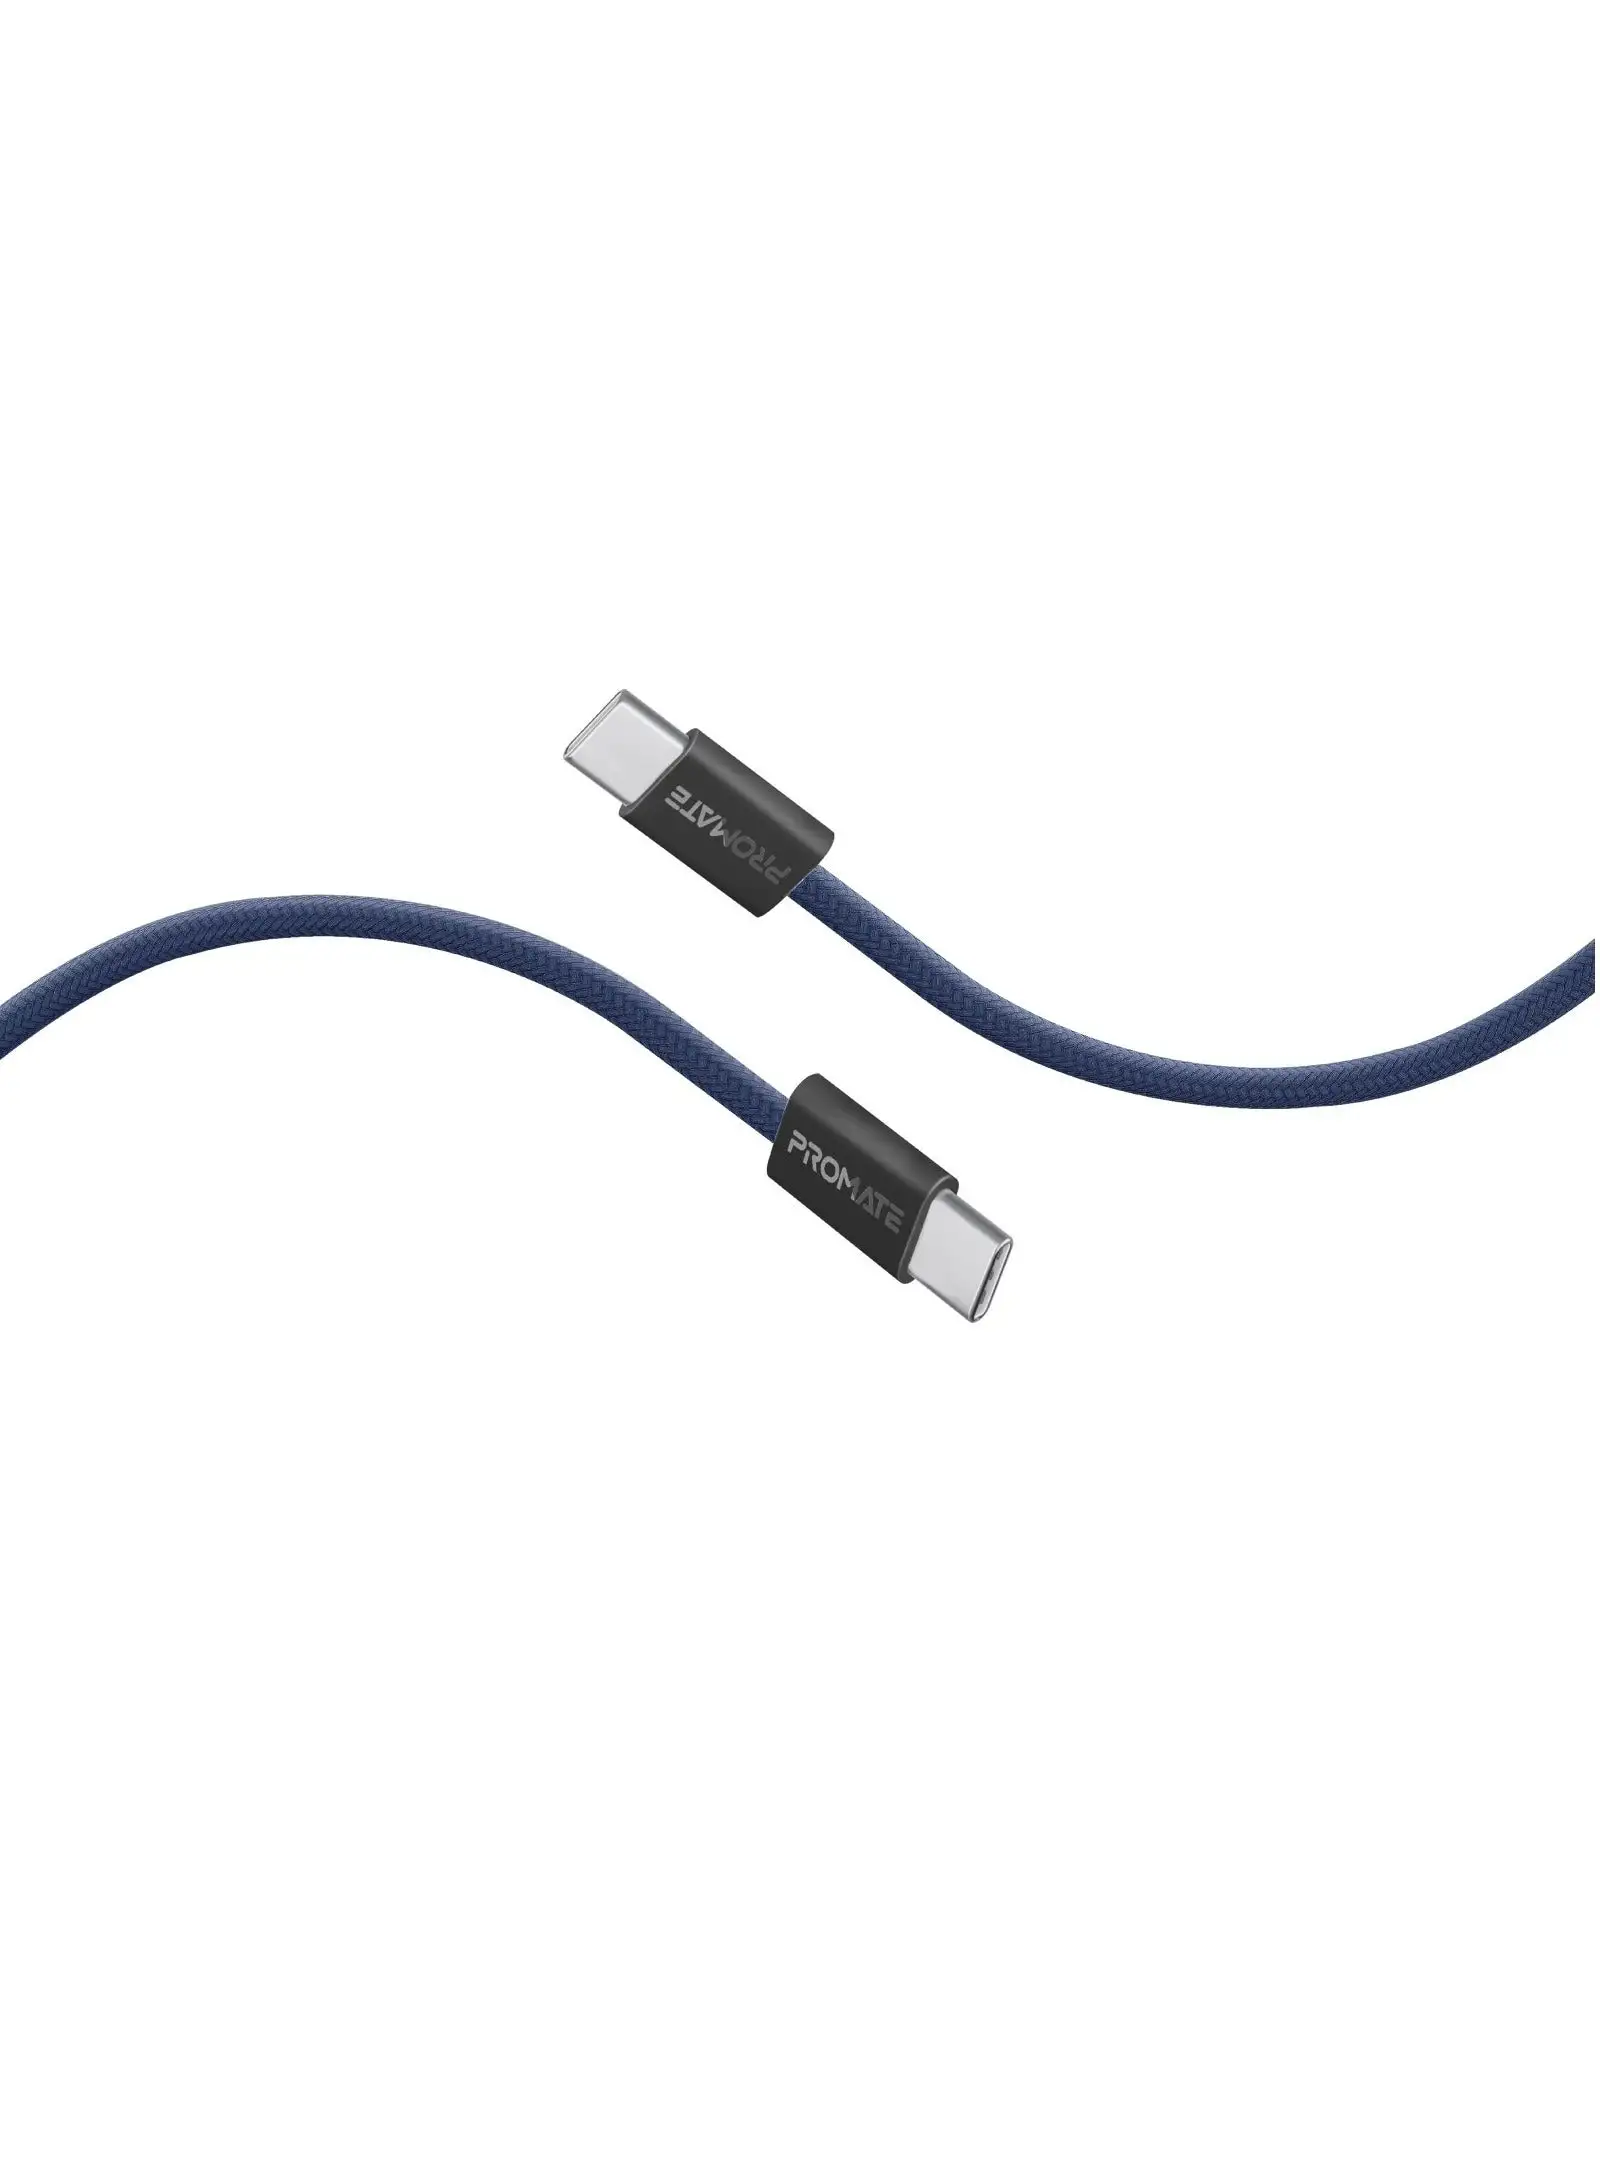 PROMATE USB-C Charging Cable, Powerful Sync Charge Type-C Cable with 60W Fast Power Delivery, 480Mbps Data Transfer and 120cm Tangle-Free Nylon Braided Cord, EcoLine-CC120 Blue